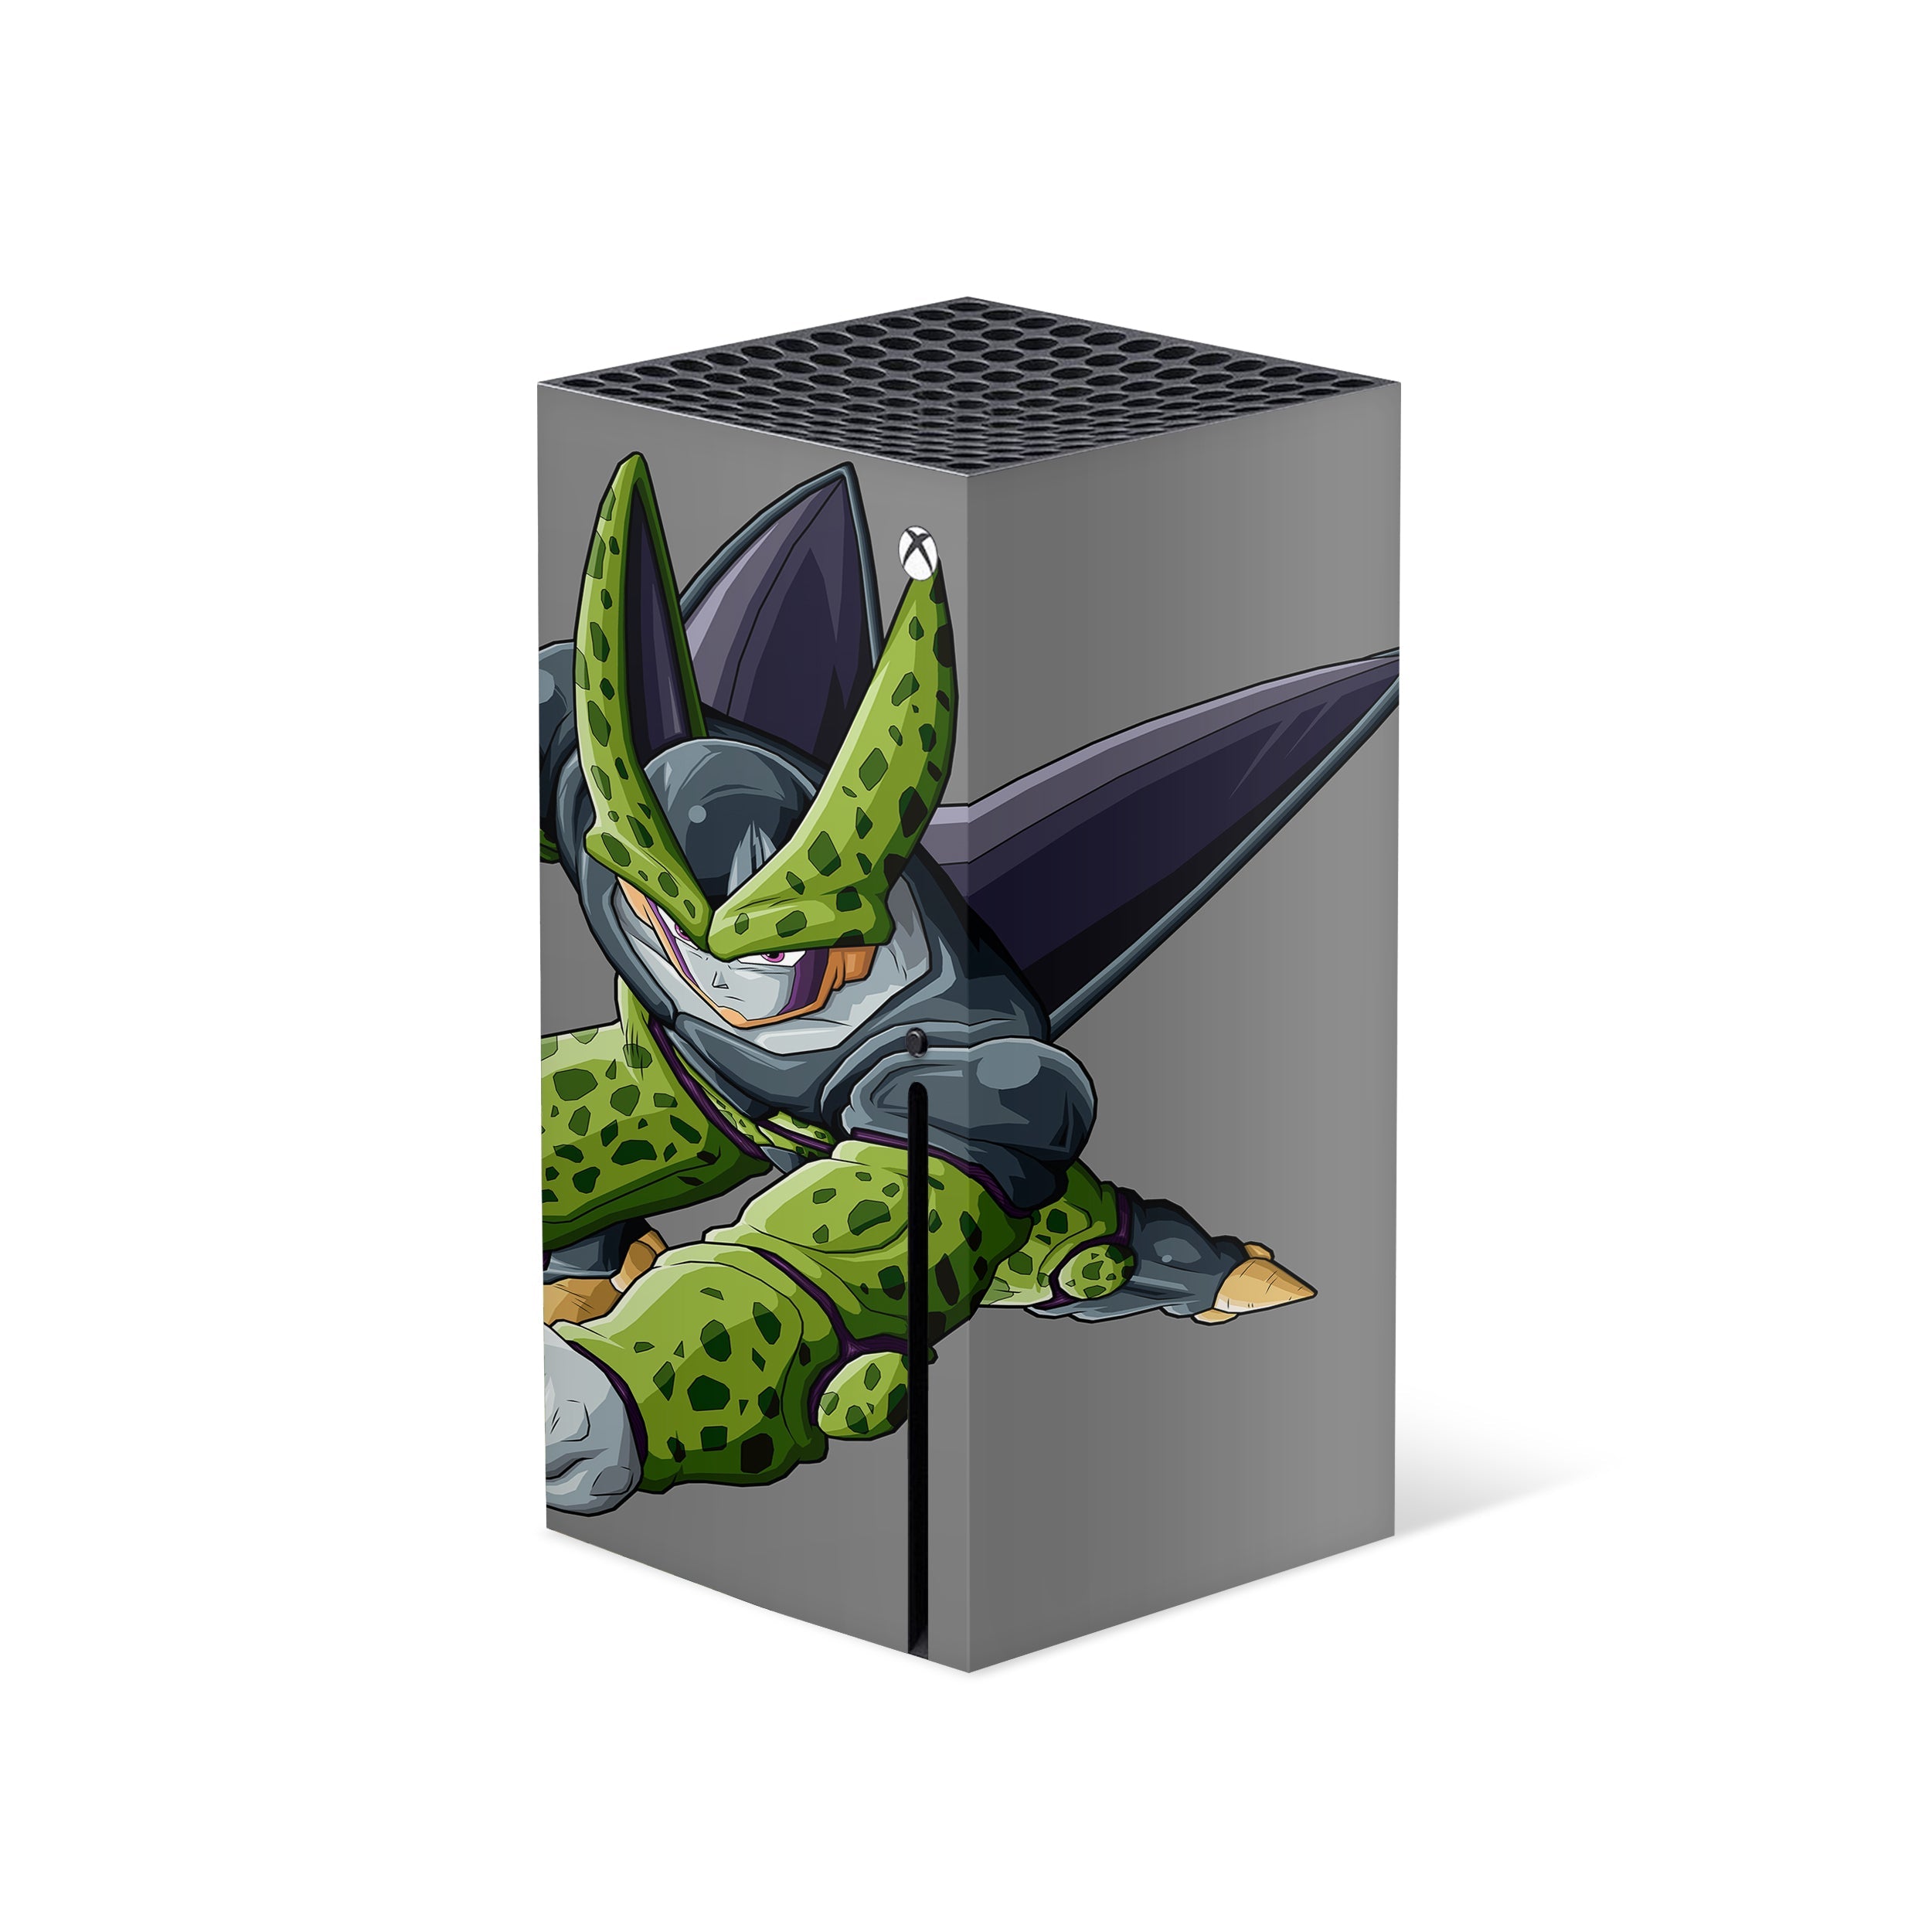 A video game skin featuring a Dragon Ball Z Cell design for the Xbox Series X.